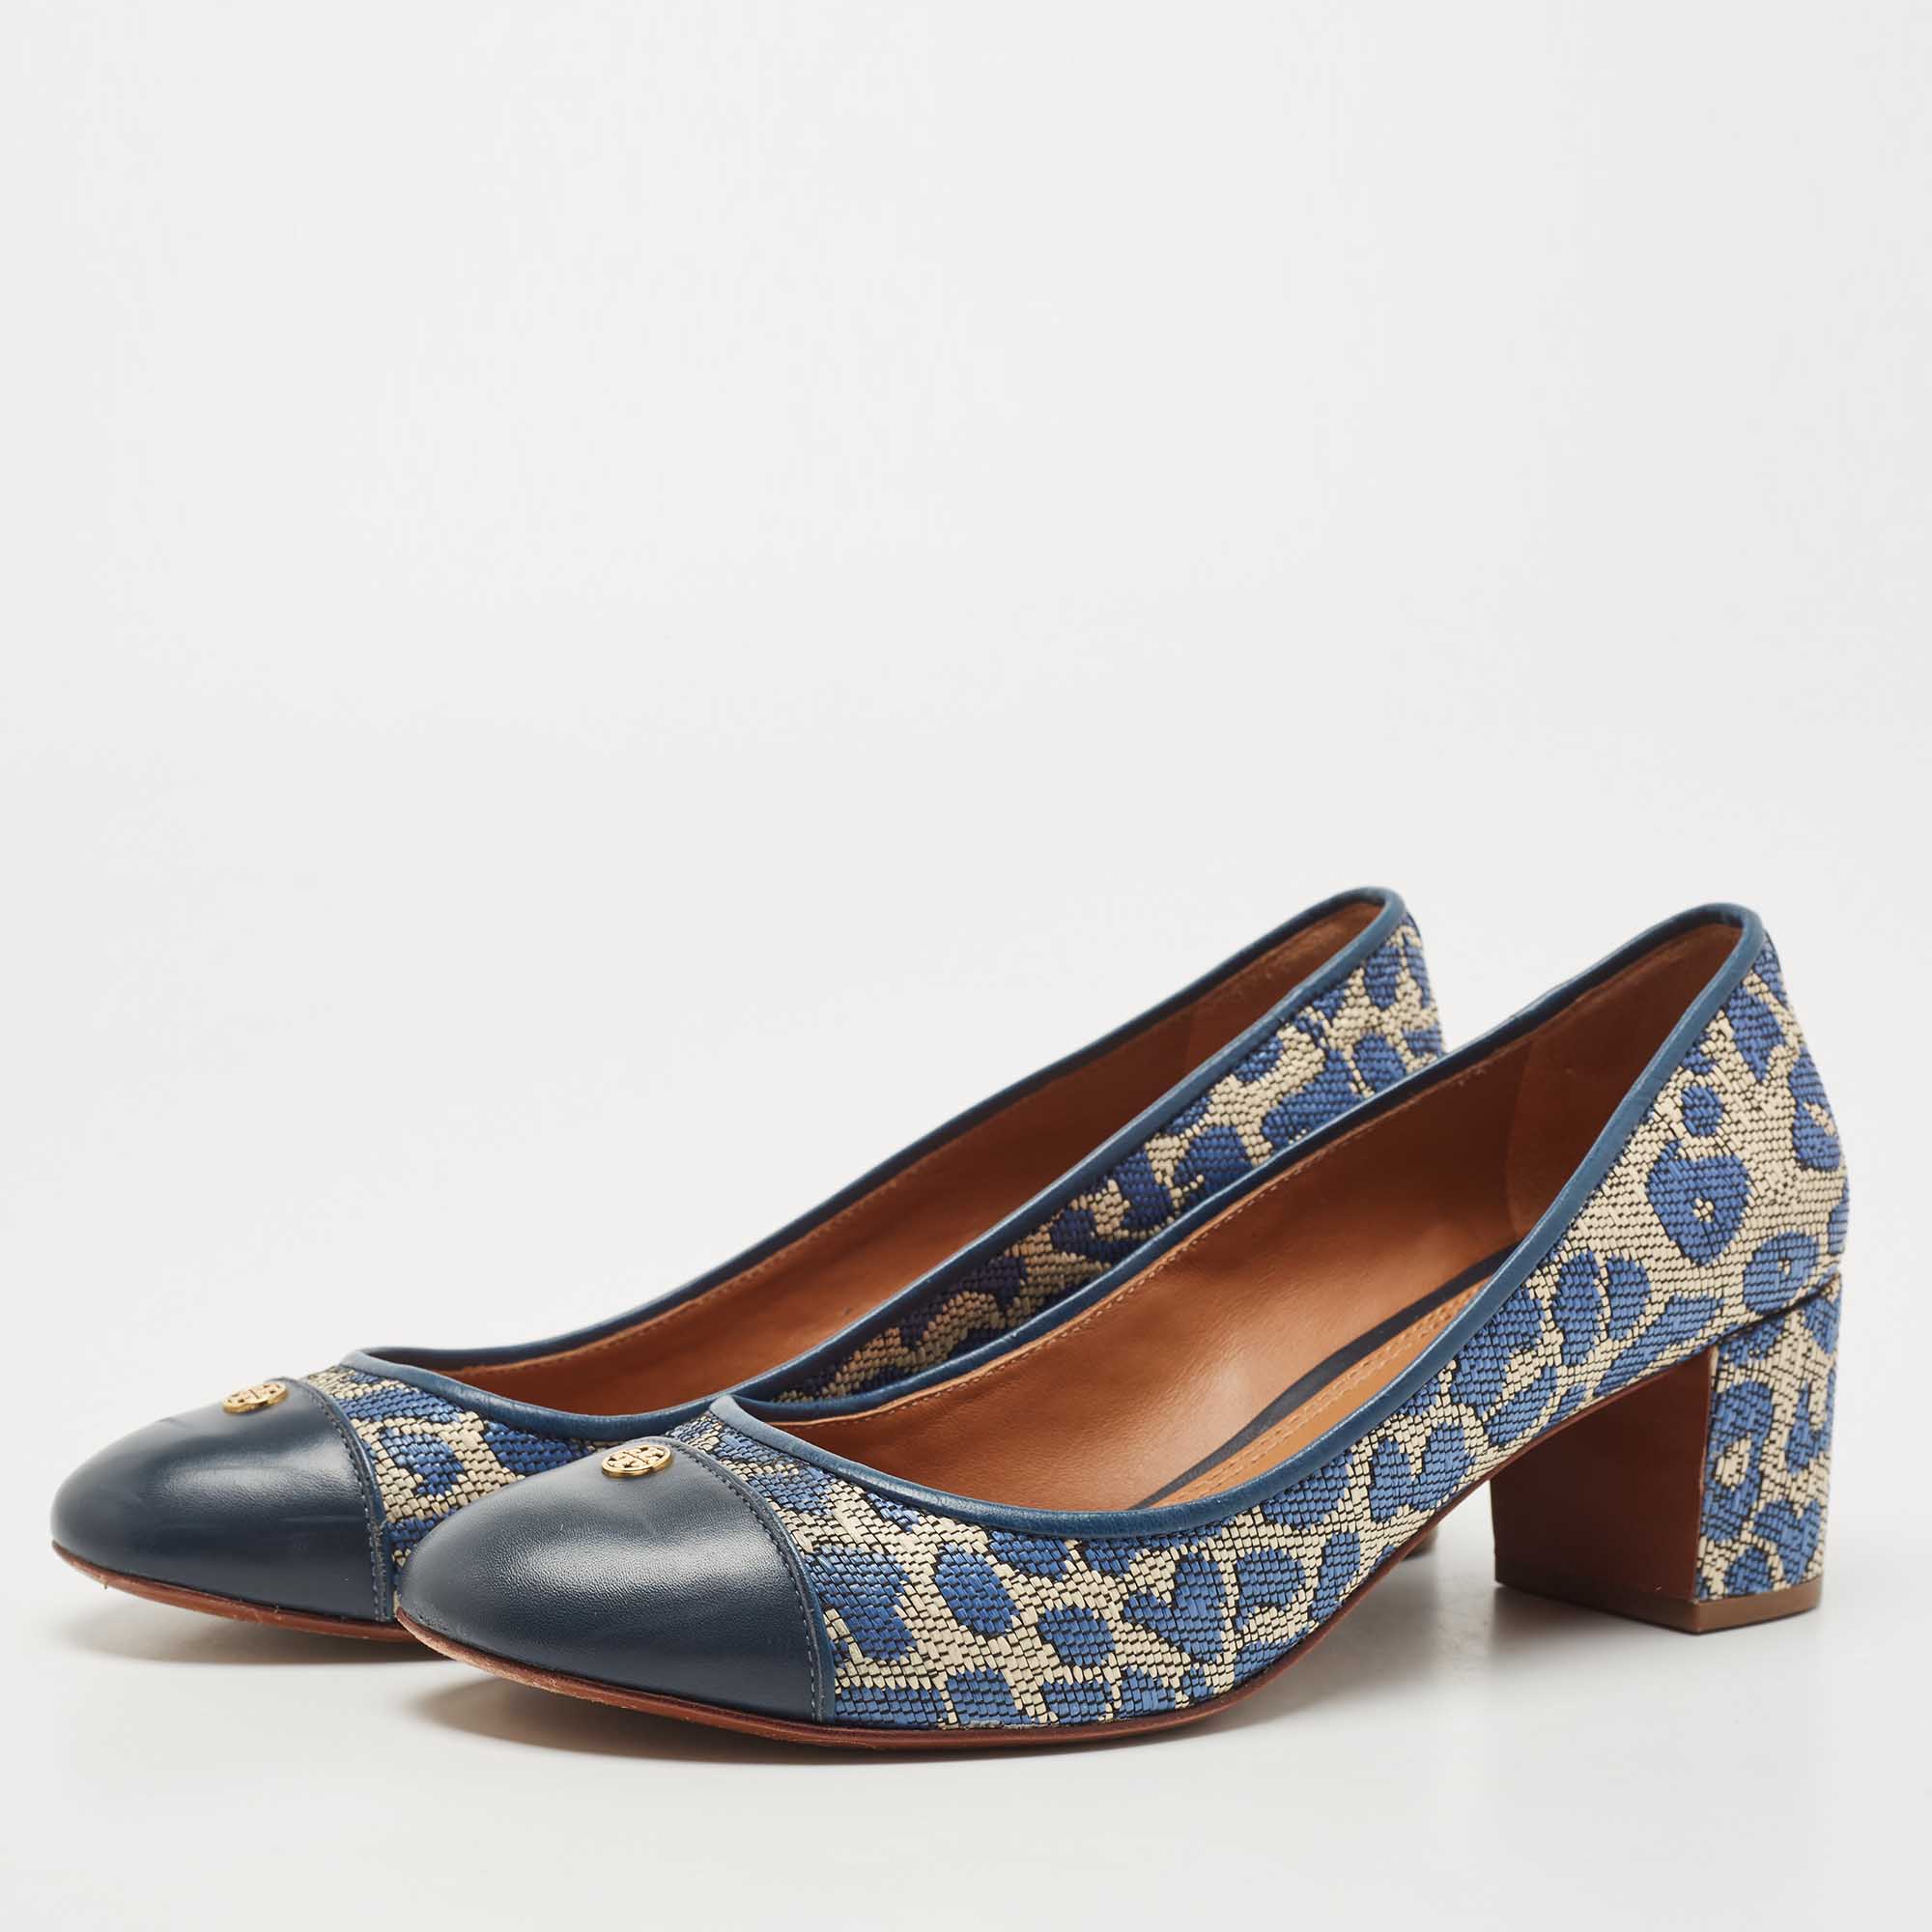 

Tory Burch Blue/Cream Printed Raffia and Leather Ethel Pumps Size